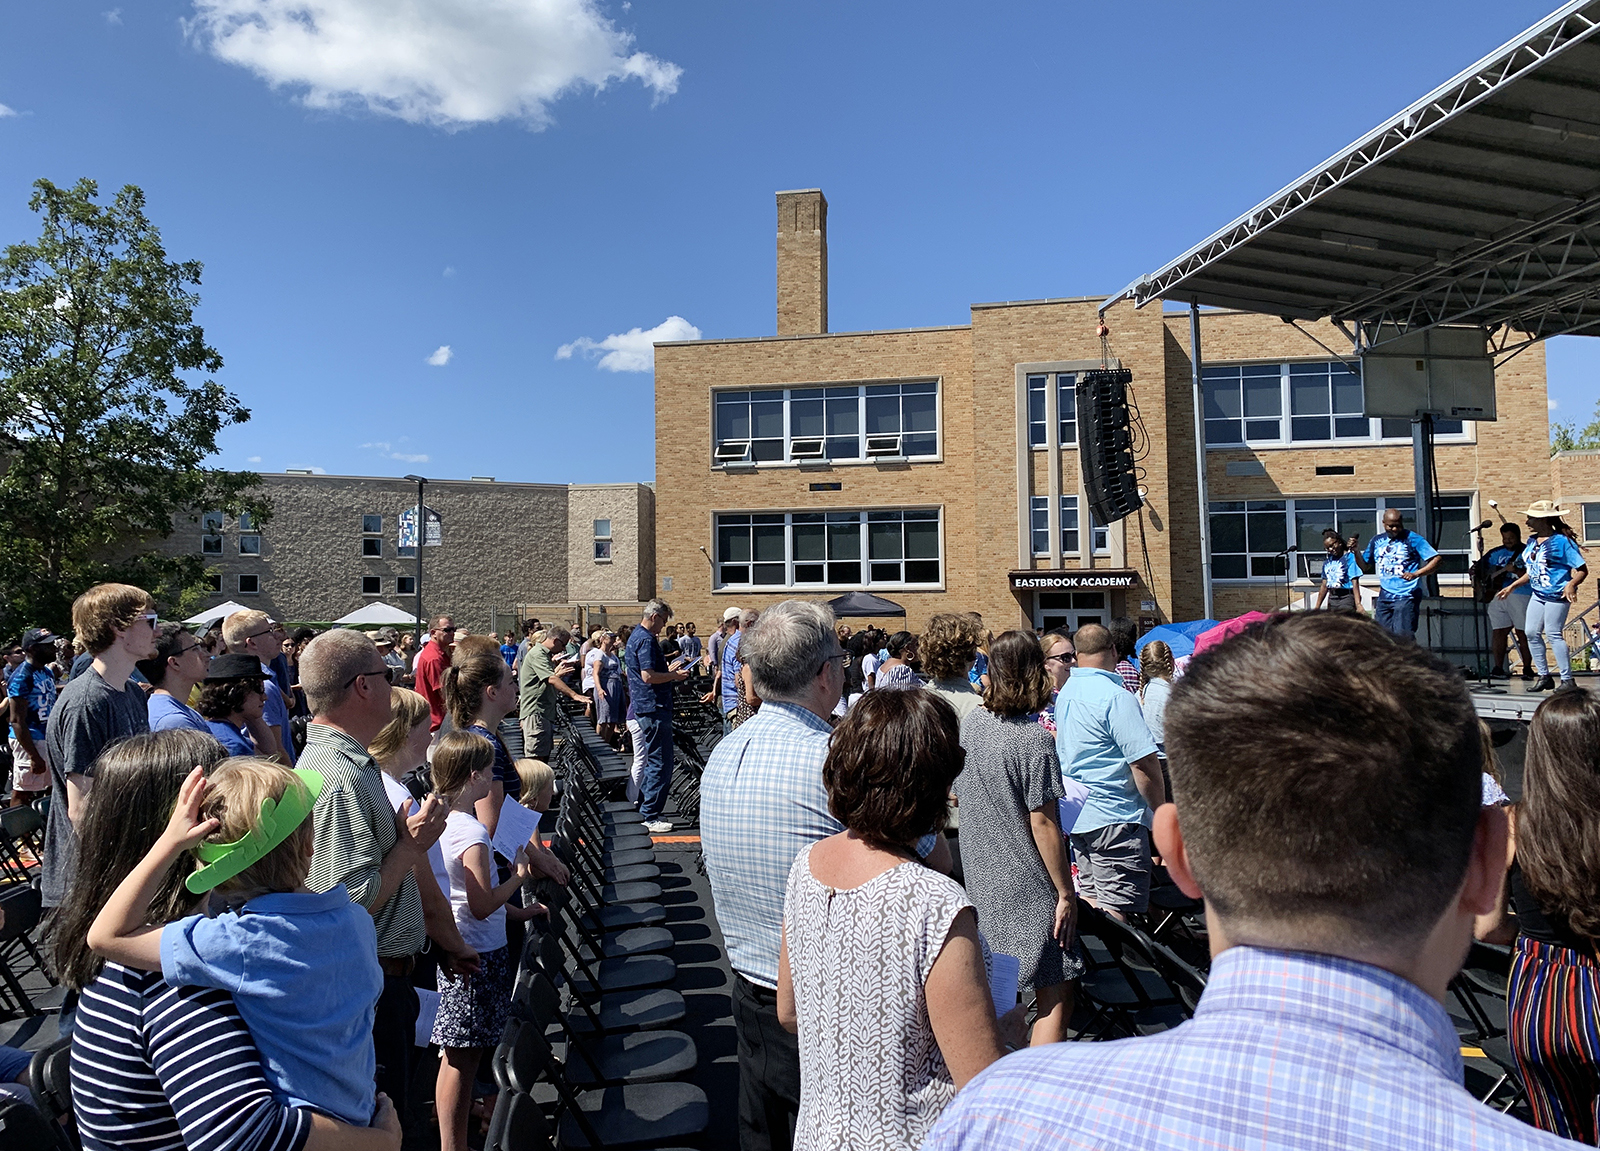 Worshipers attend an outdoor service at Eastbrook Church in Milwaukee, Wisconsin in August 2021. RNS Photo by Bob Smietana